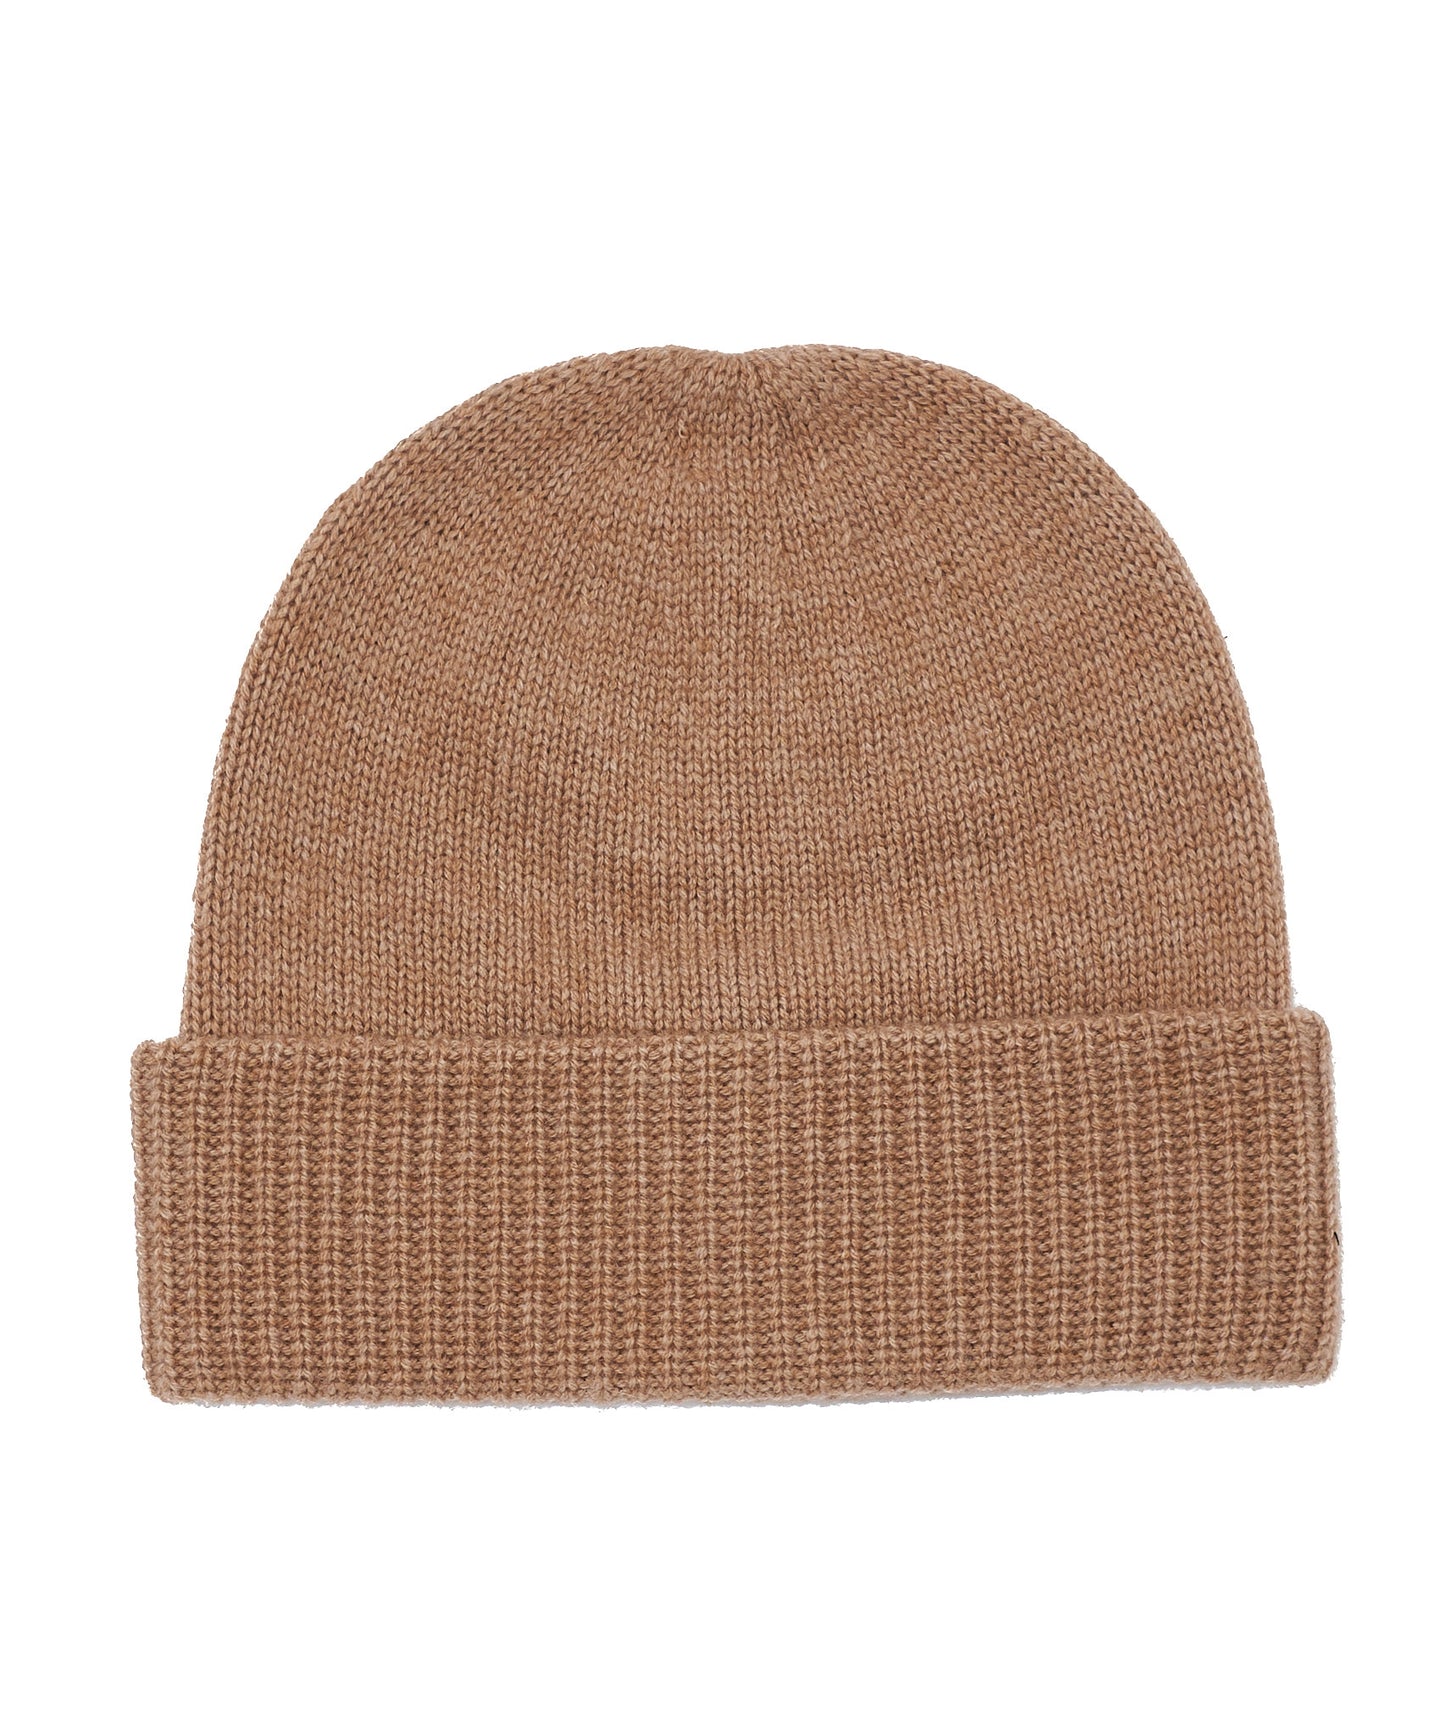 Wool/Cashmere Lofty Beanie in color Camel Heather